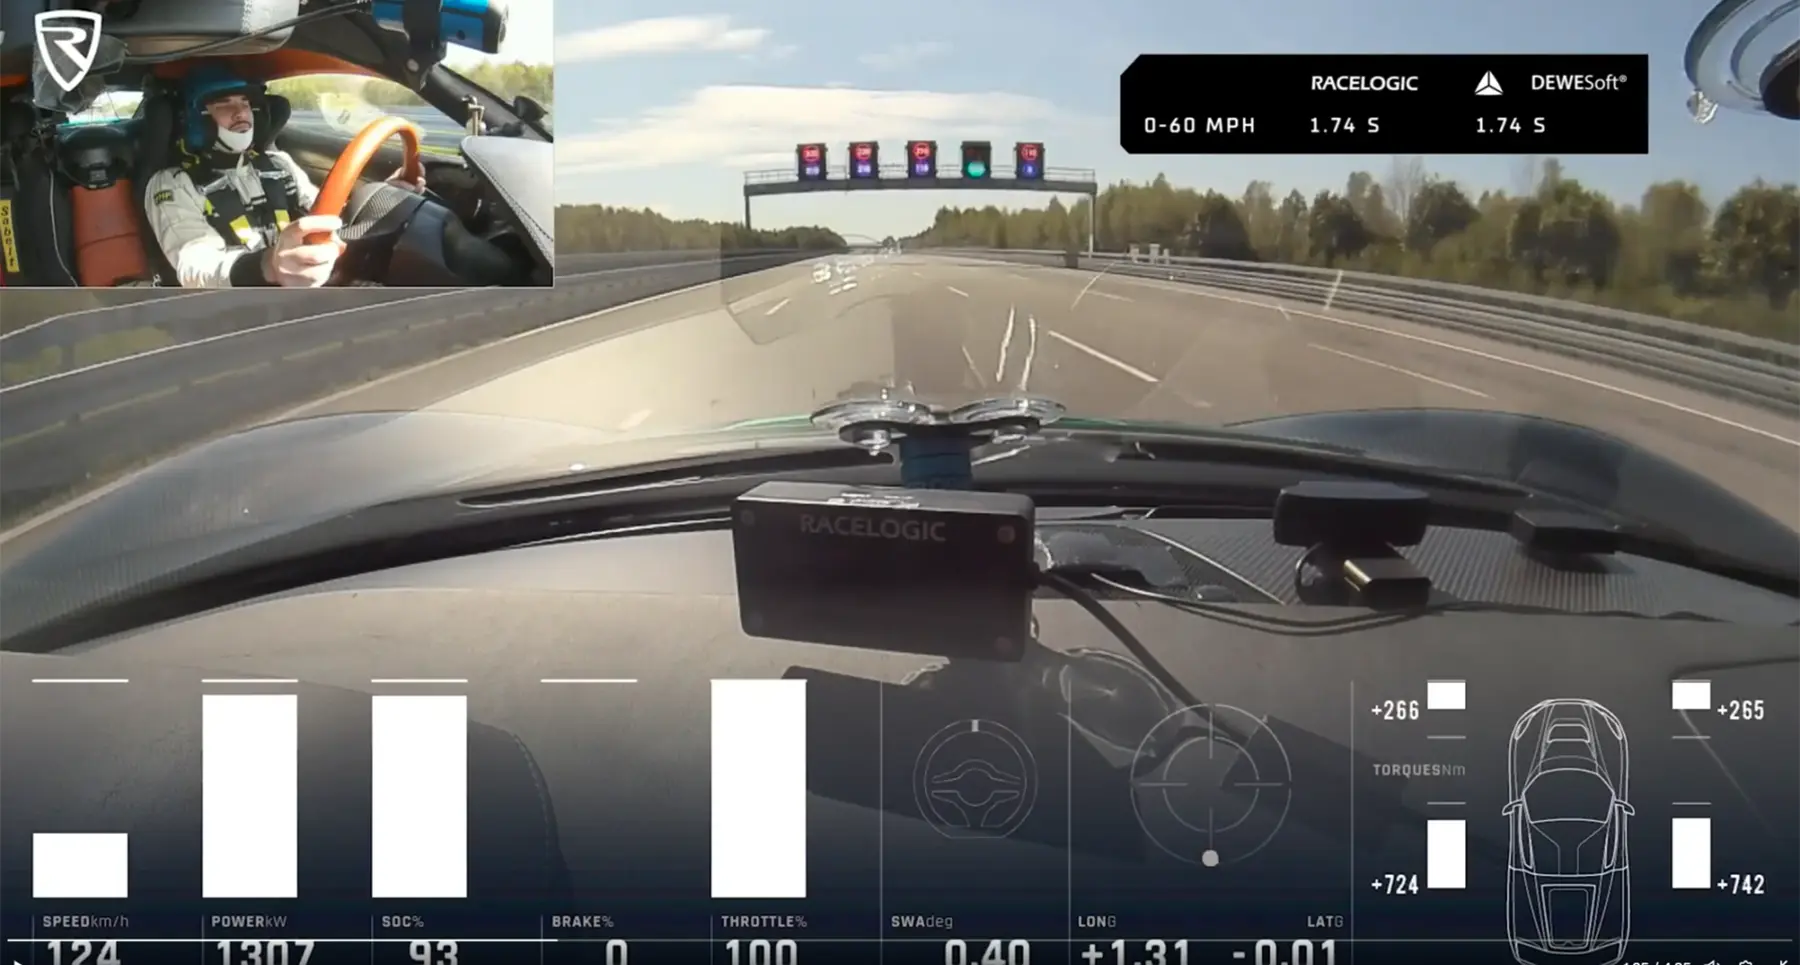 New world record: 0 – 100 km/h in 1.82 seconds